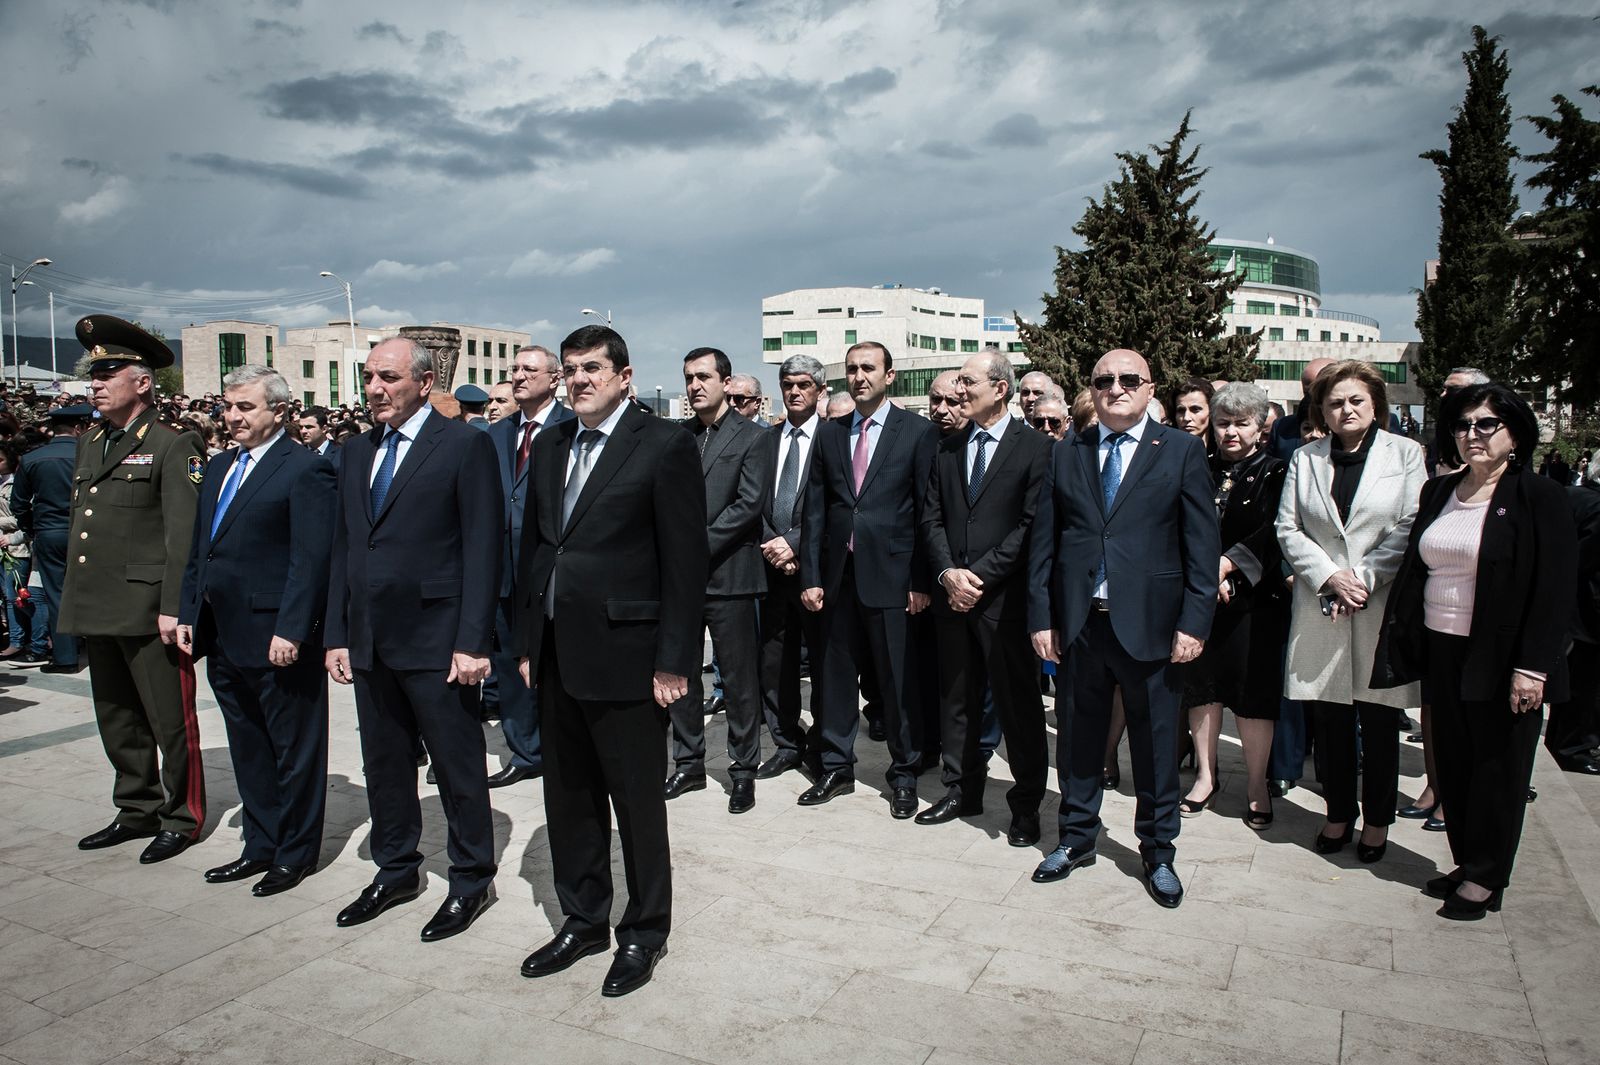 © Mattia Vacca - The politicians of the Nagorno-Karabakh government observe the Armenian Genocide Remembrance Day.